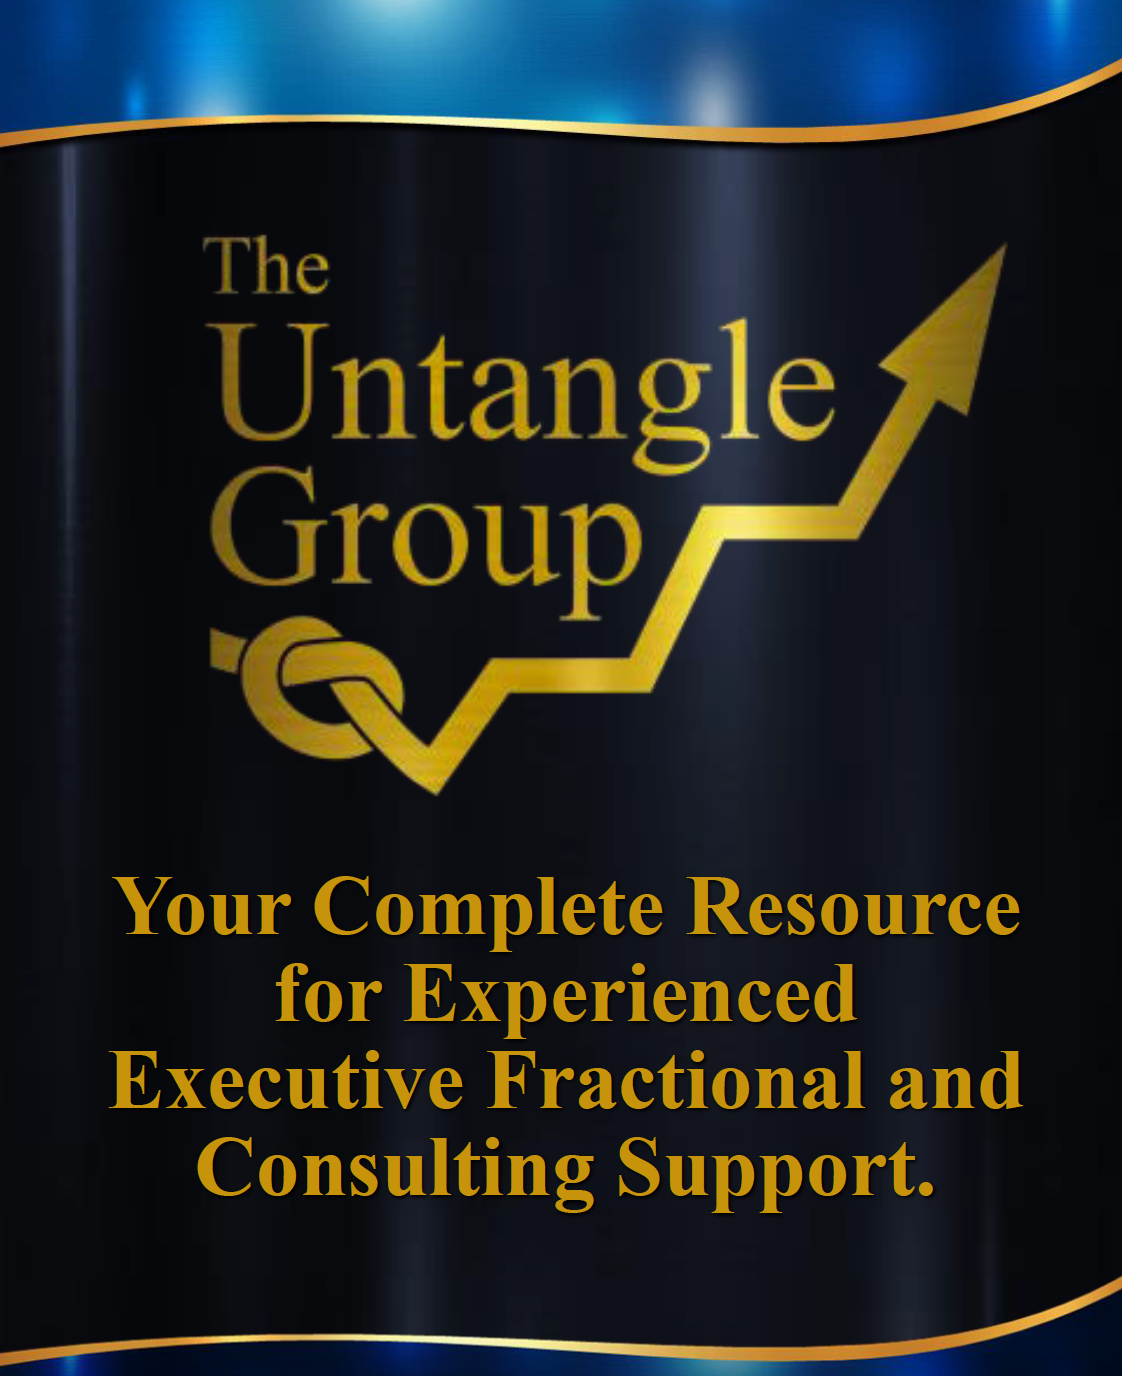 HR4U Joins The Untangle Group